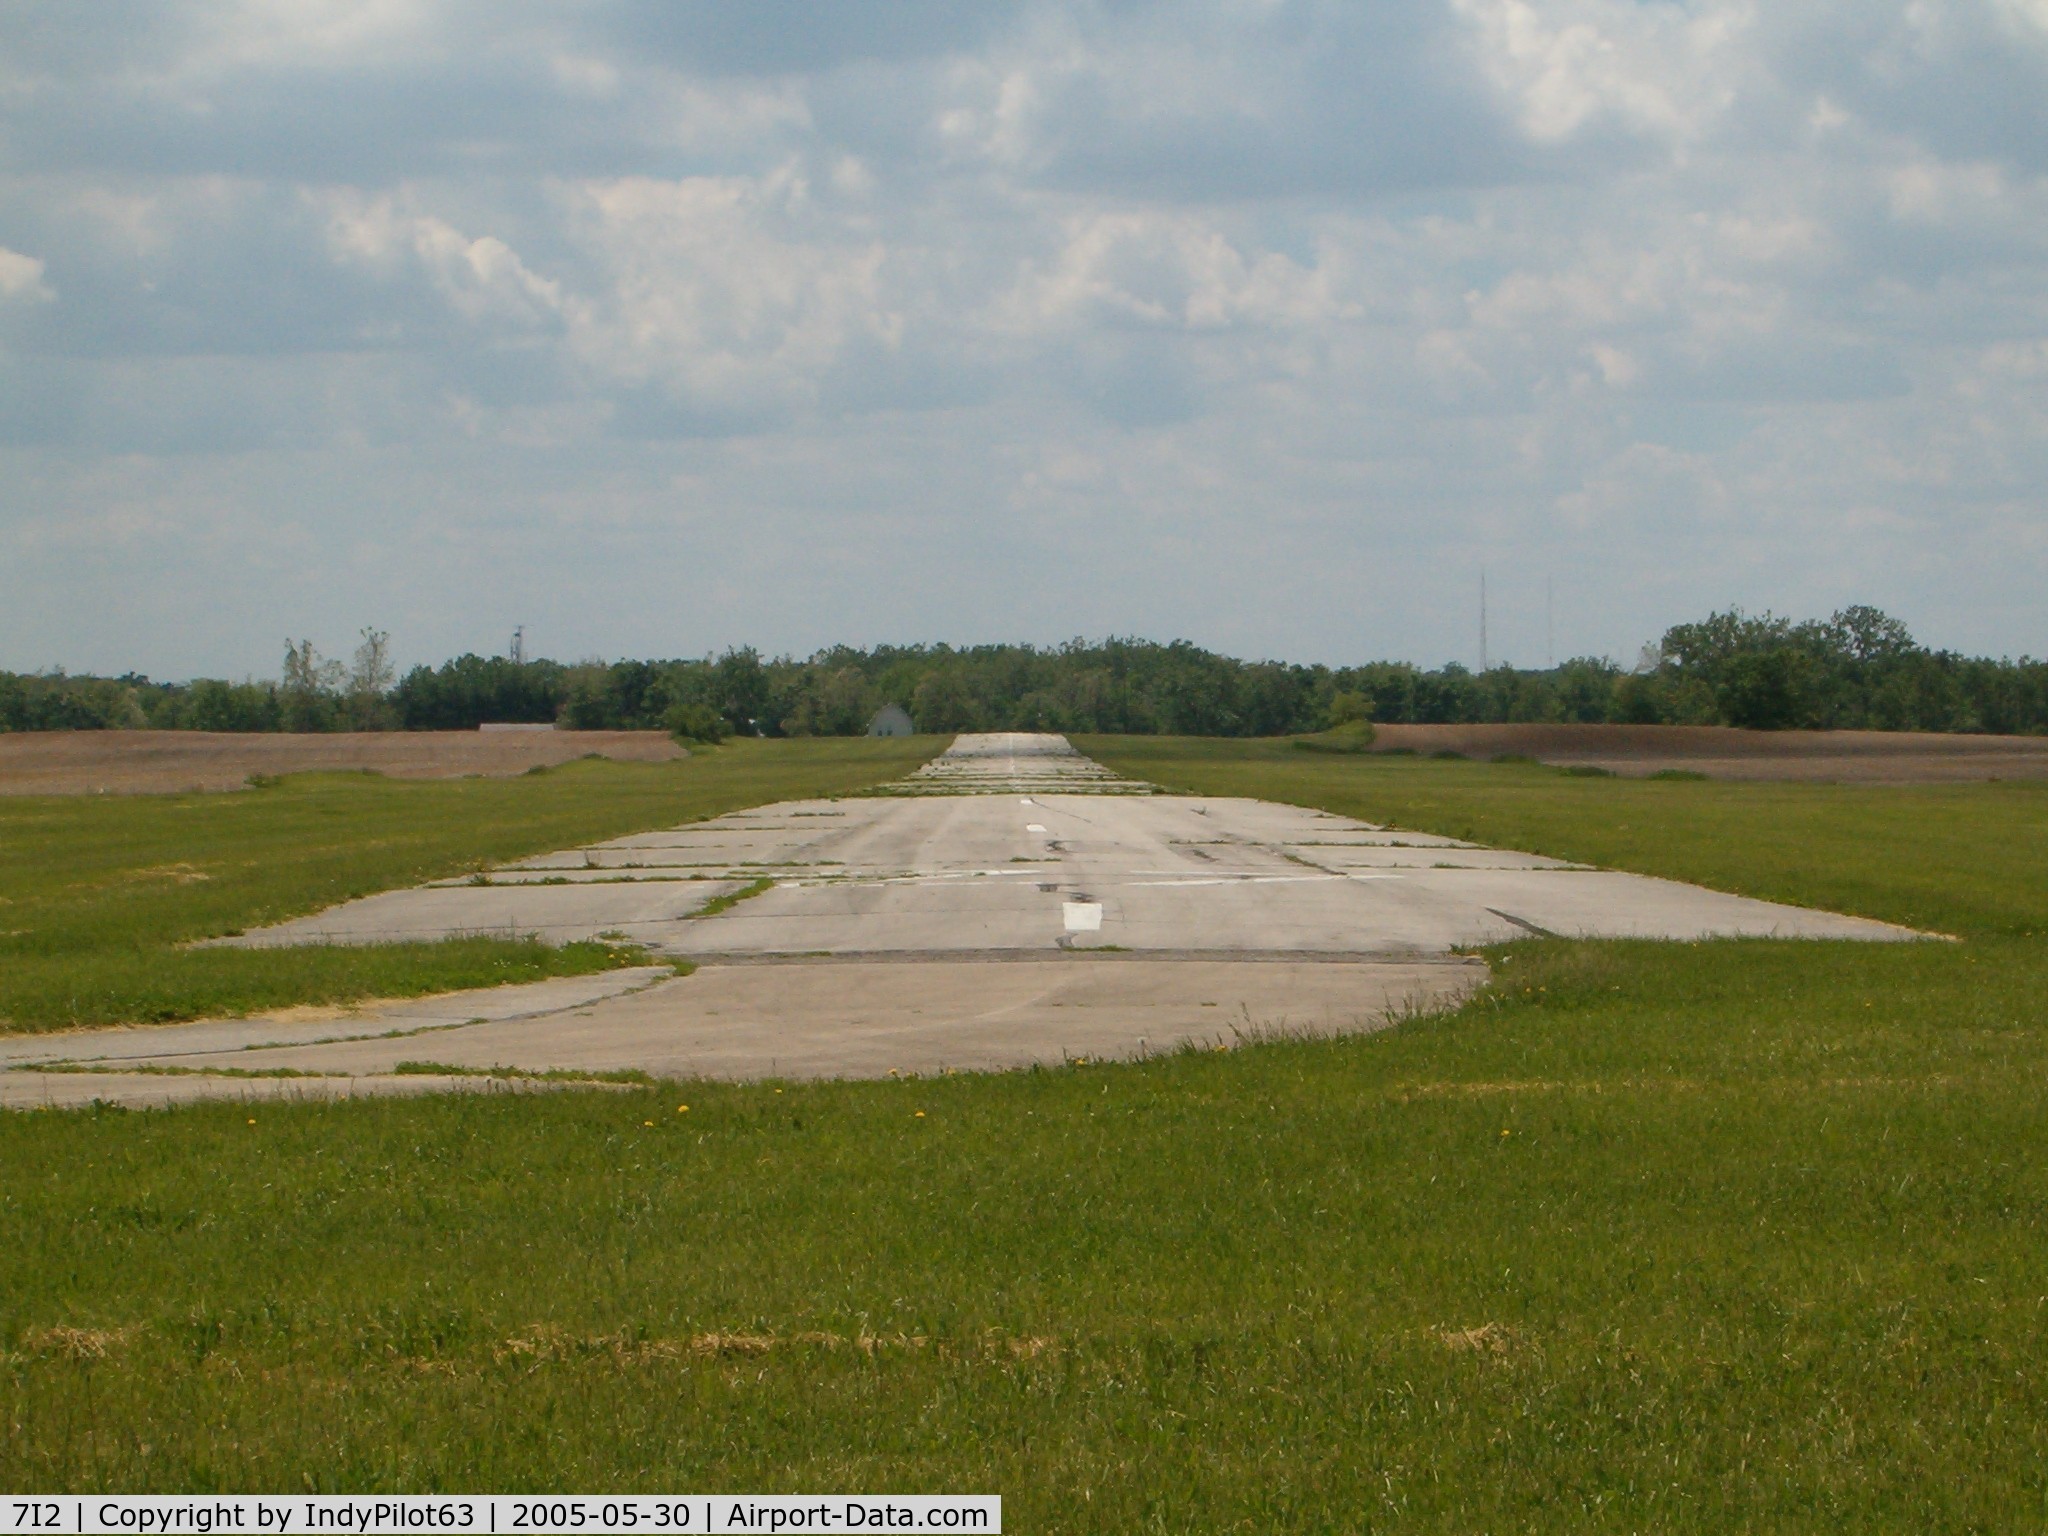 Reese Airport (7I2) - looking up runway 27